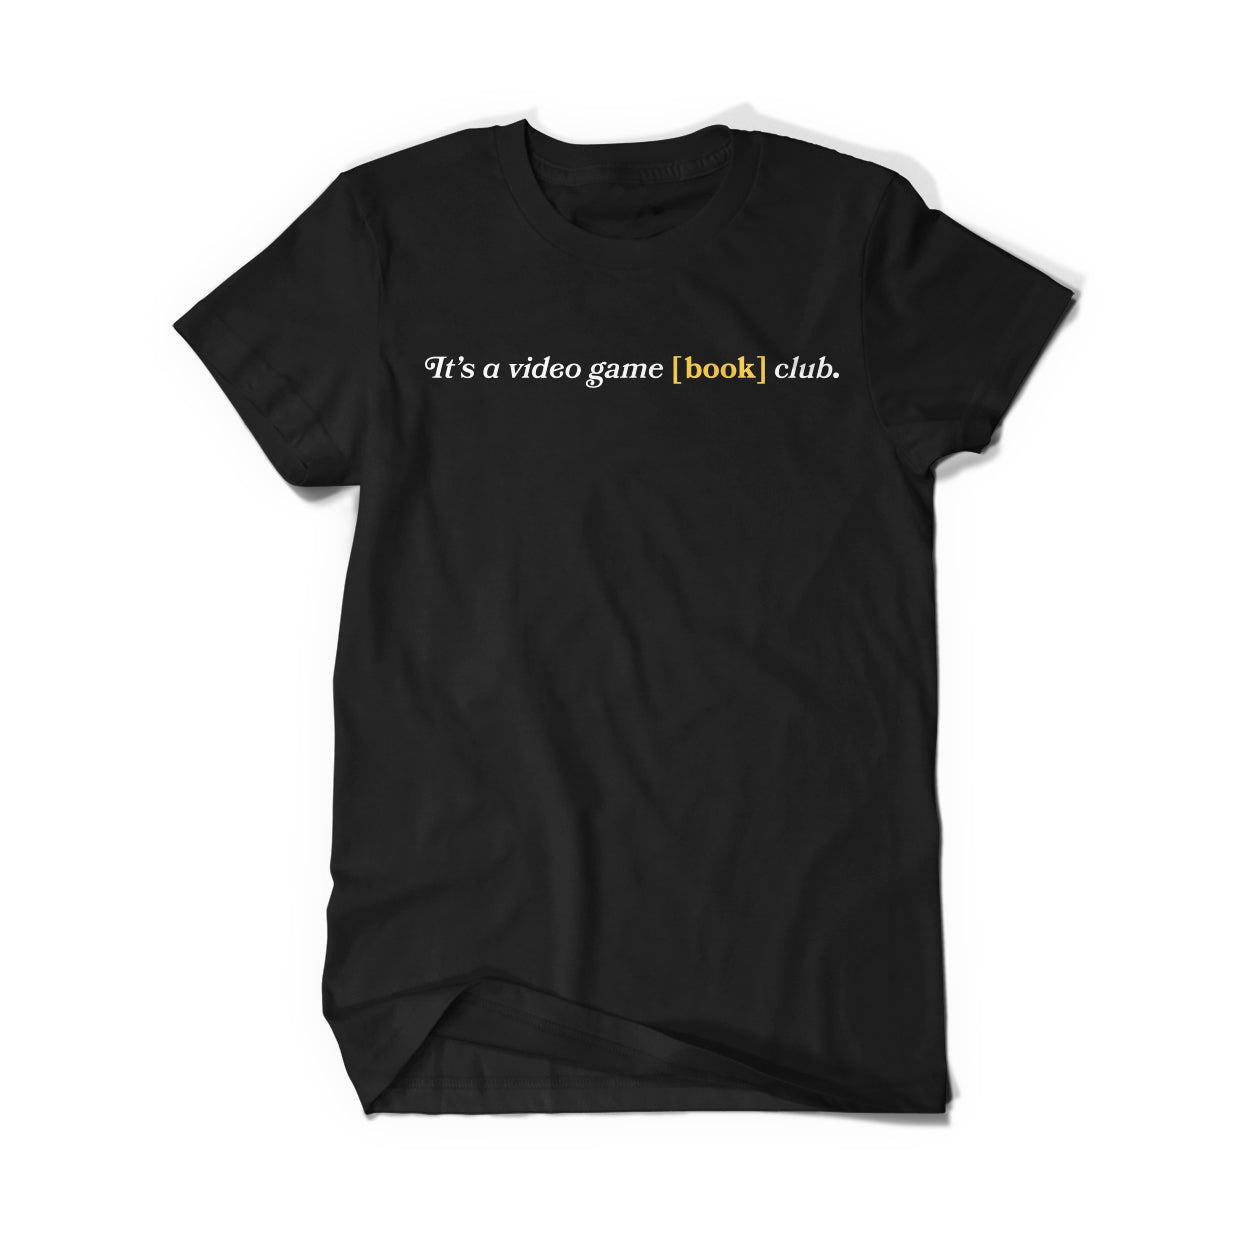  A black tee-shirt that says, “It’s a video game [book] club.” The [book] is in yellow. 